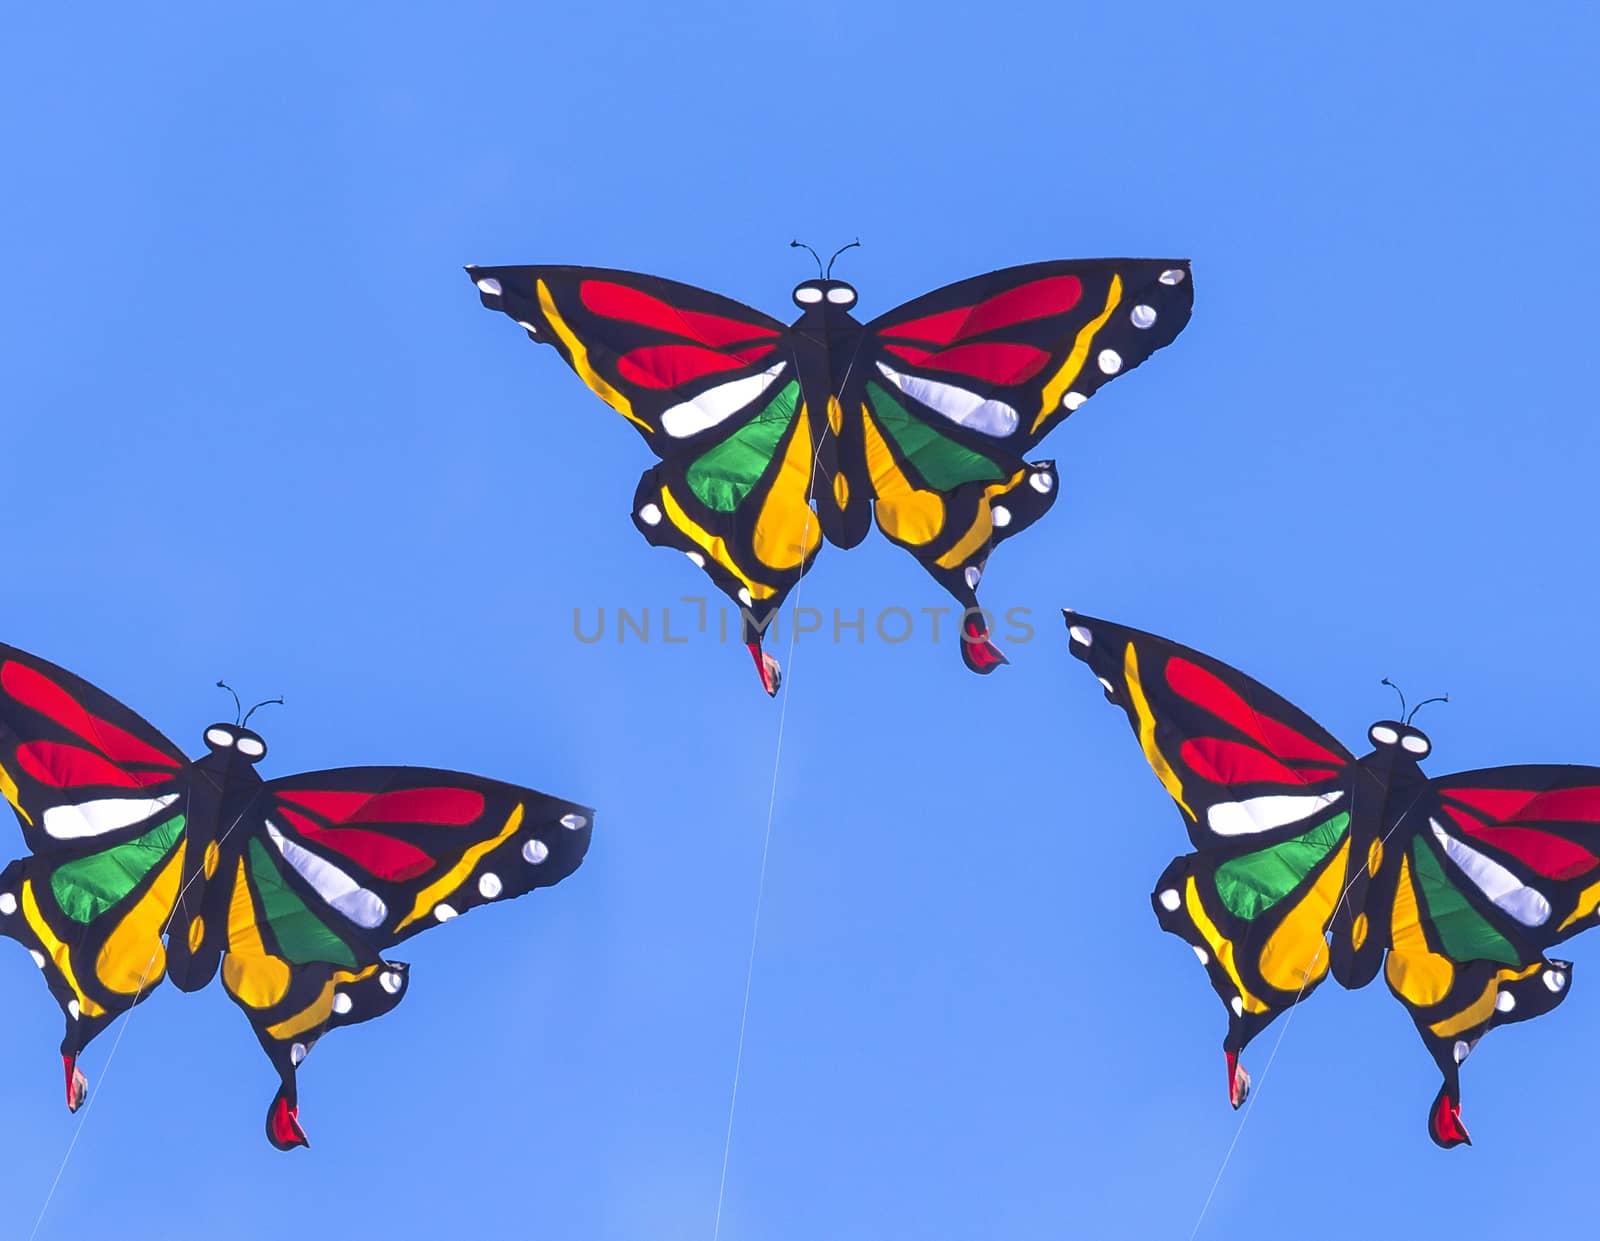 Colorful Kite Flying in Blue Sky by truphoto